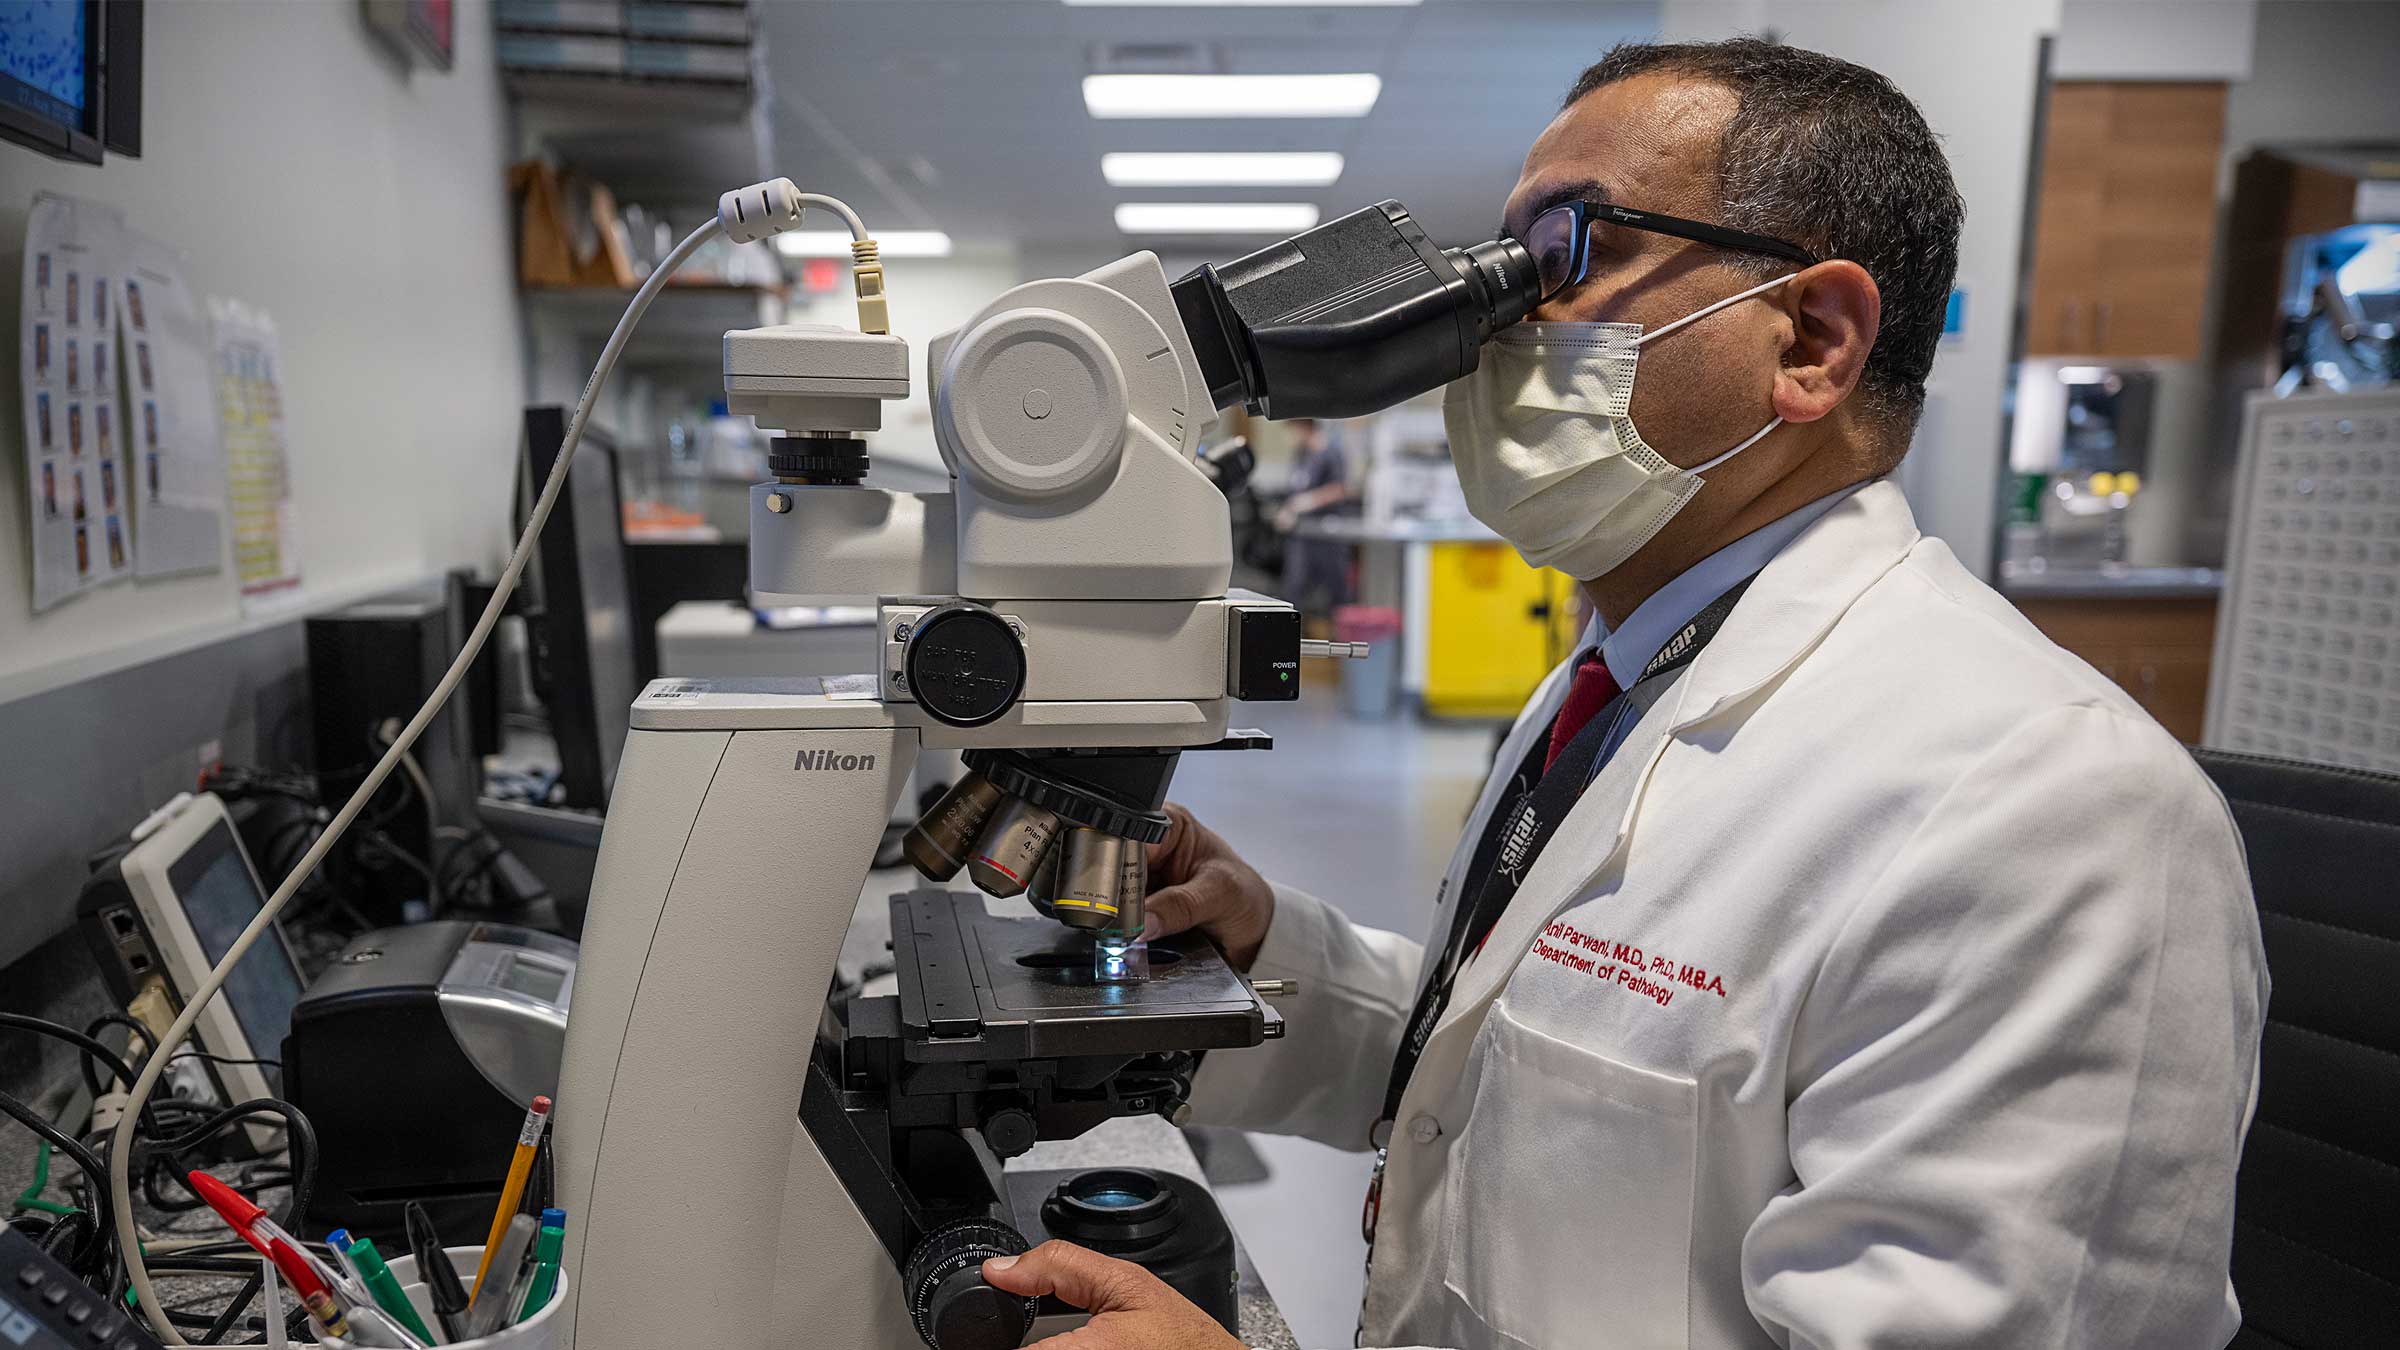 Dr. Anil Parwani looking at cancer cells under a microscope